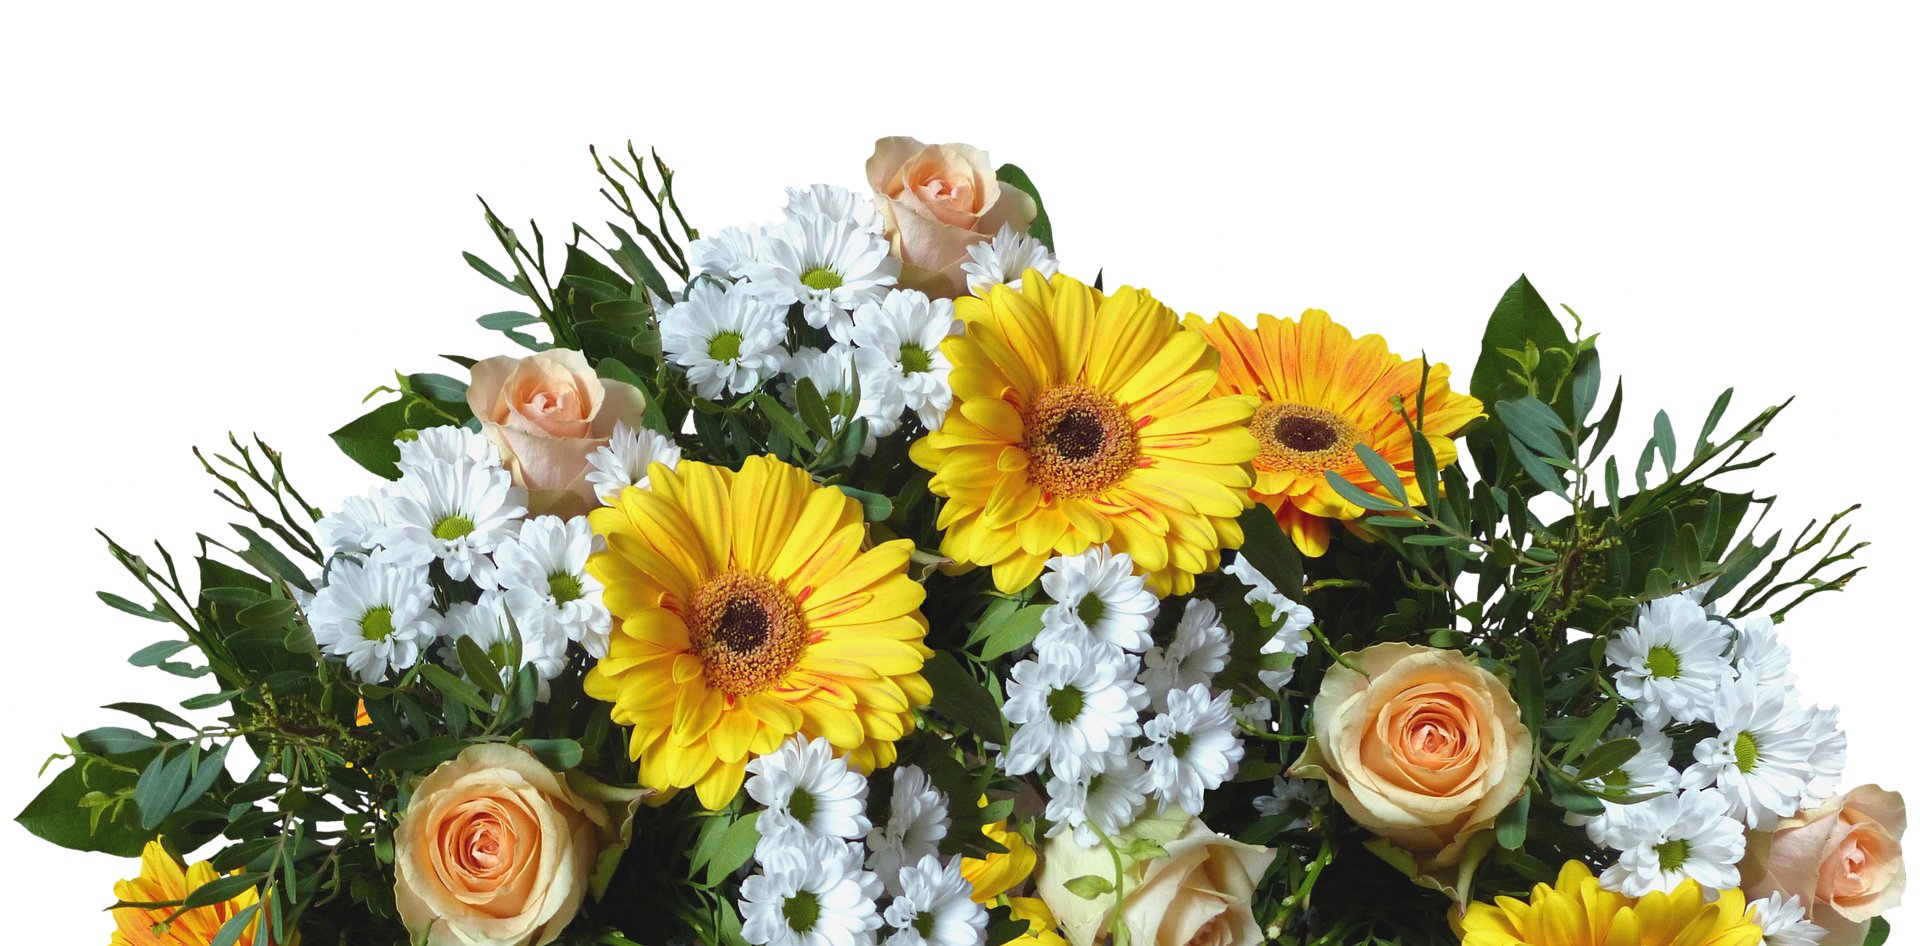 Funeral Flowers Bunch Free Transparent Image HD PNG Image